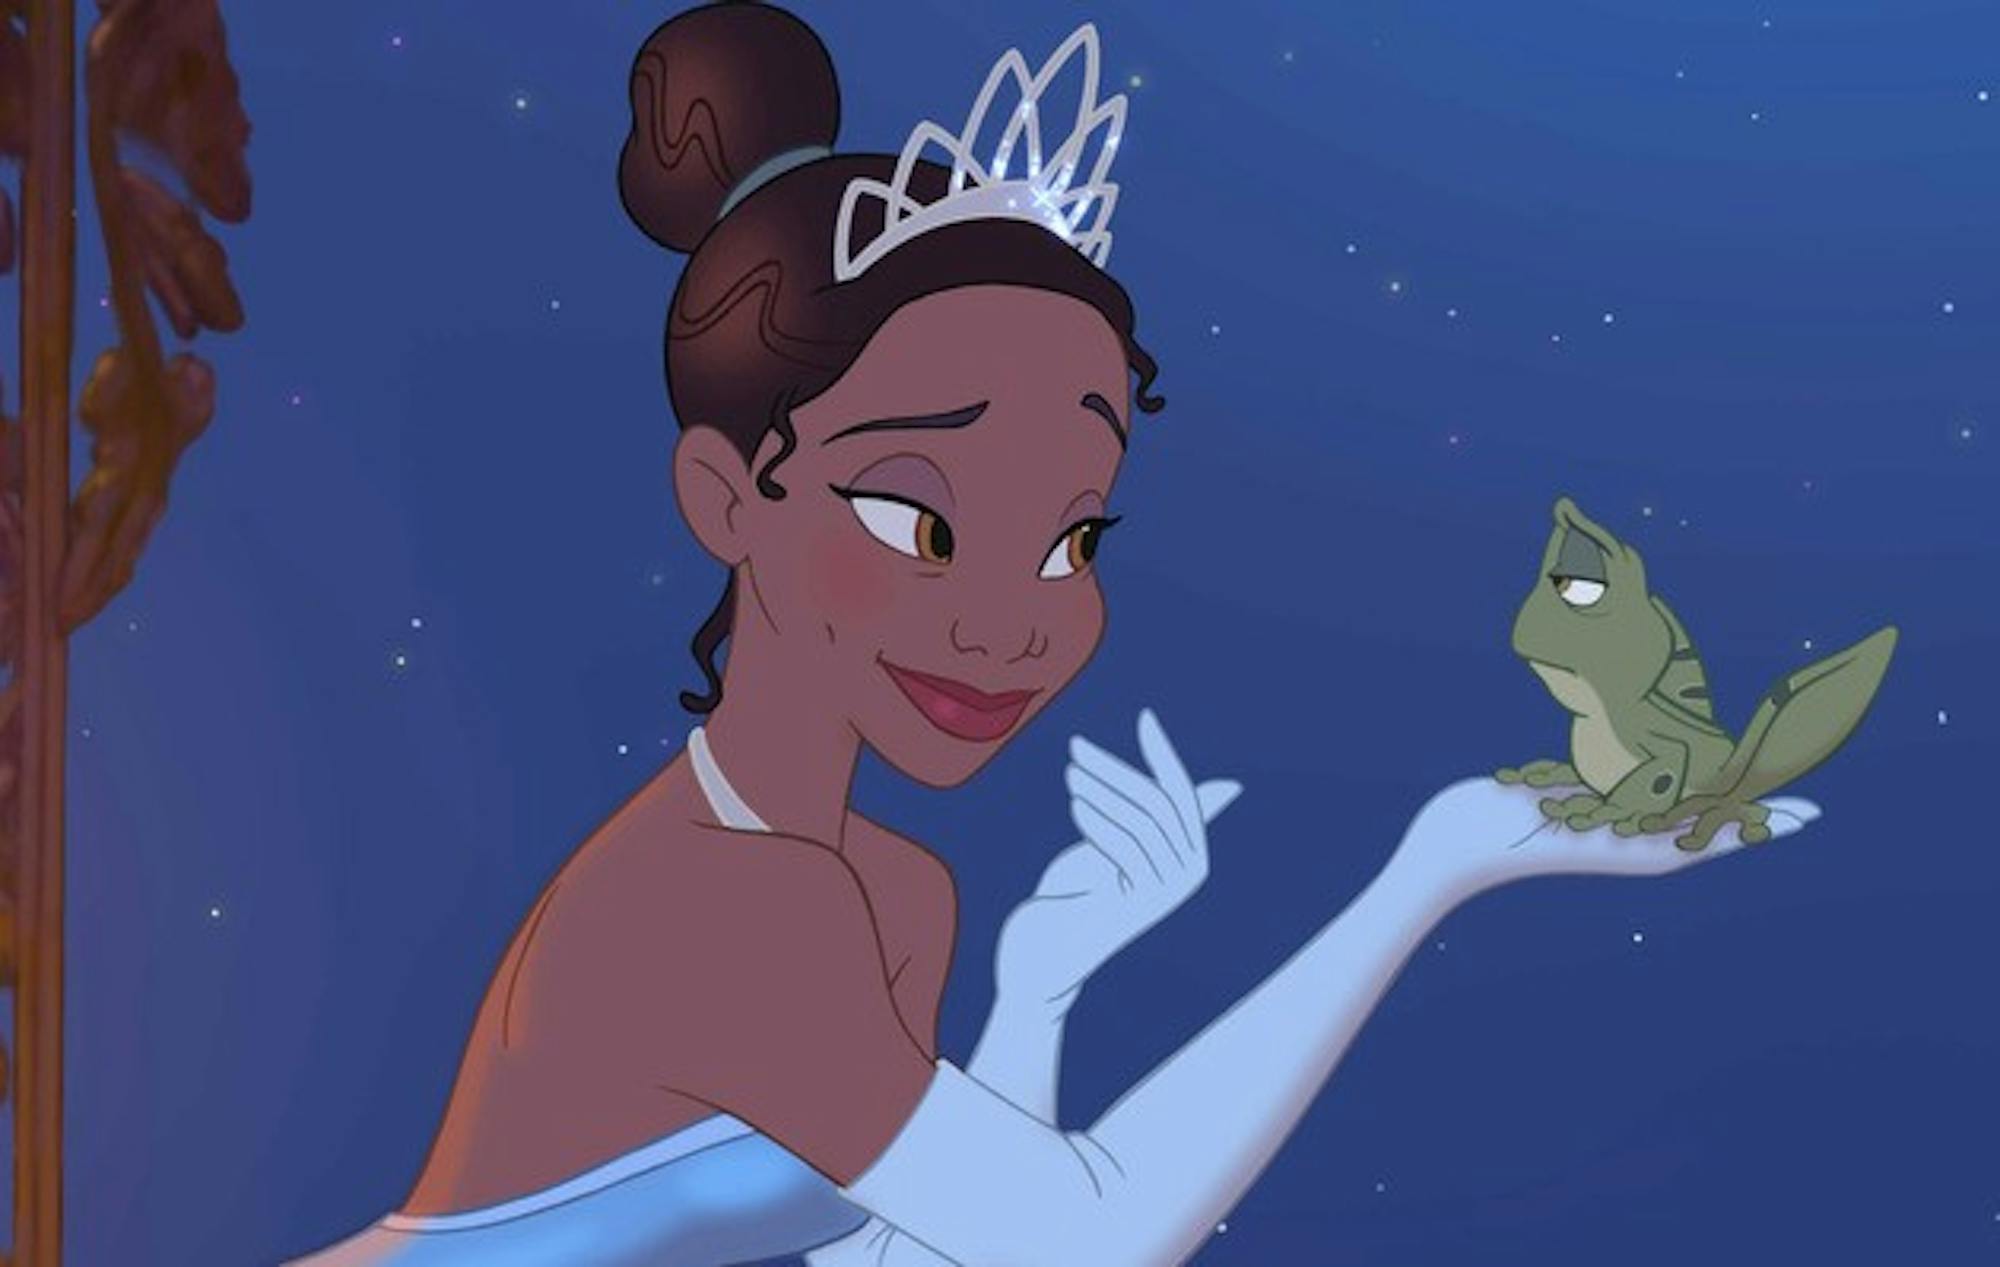 According to Cailtlin Kennedy, there's more to the newest Disney princess than the much-publicized color of her skin.